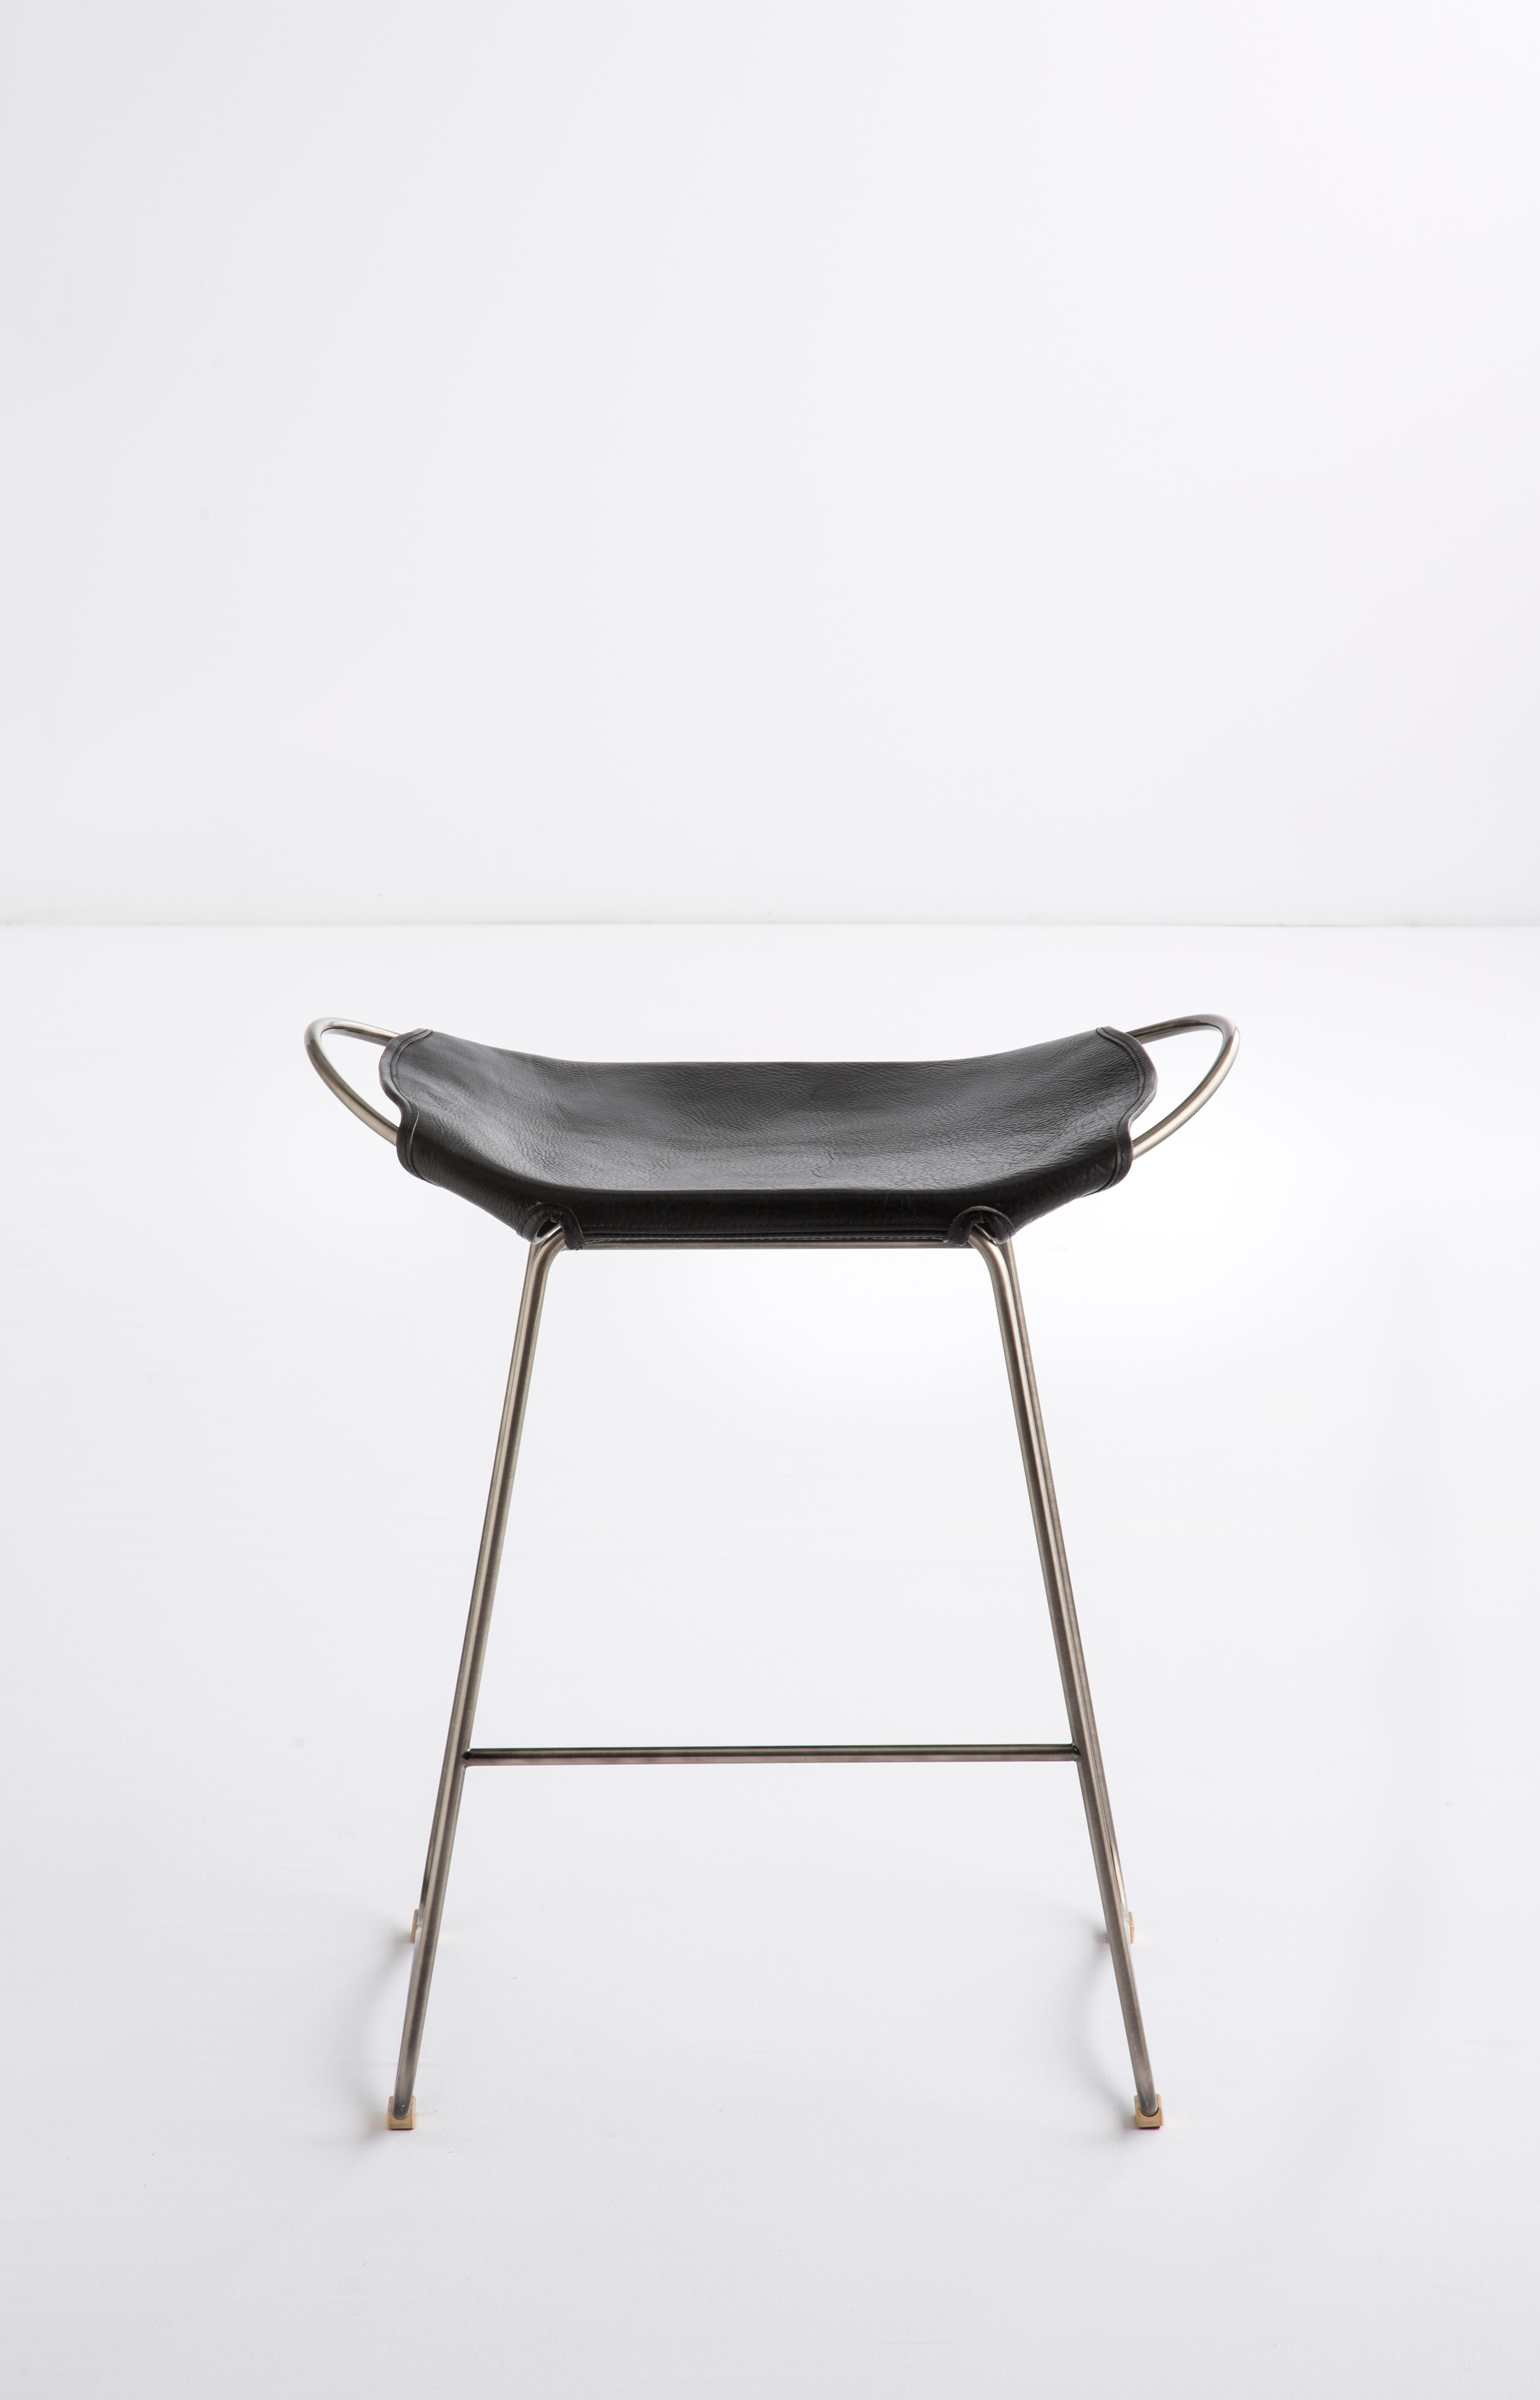 Spanish Sculptural Organic Contemporary Bar Stool Old Silver Metal & Black Leather  For Sale